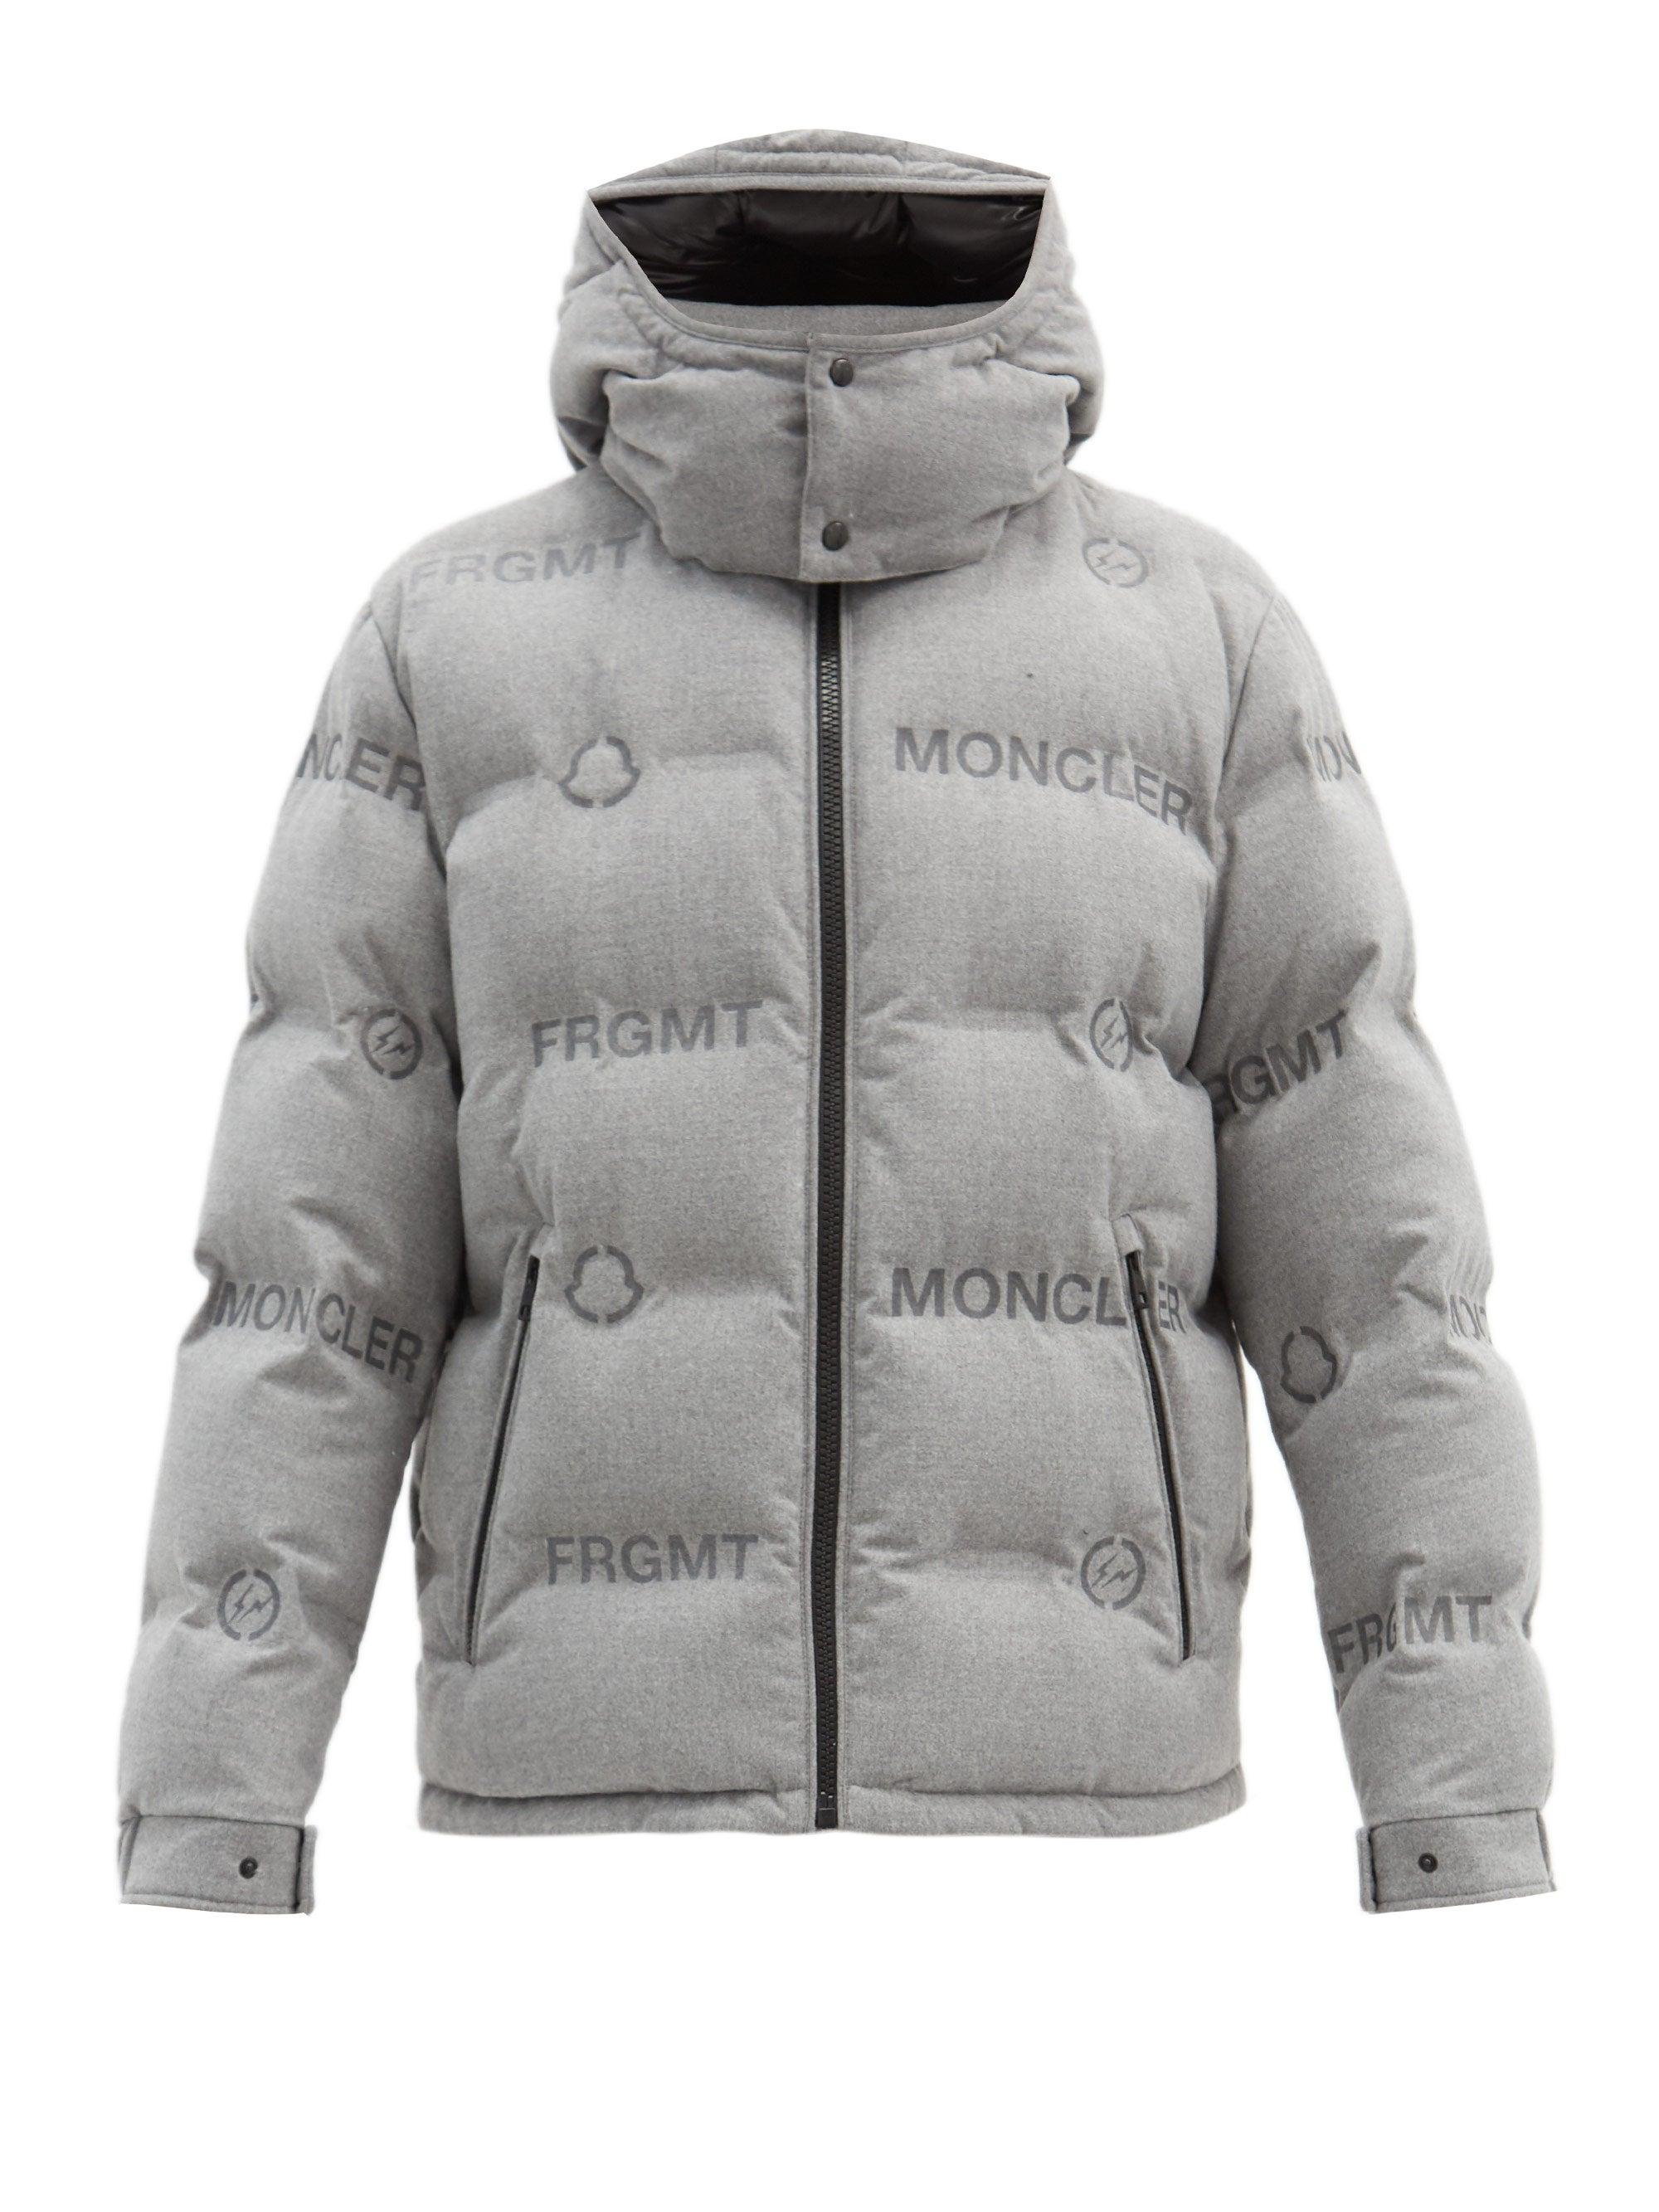 Moncler Fragment Jacket Factory Sale, 60% OFF | www.ilpungolo.org